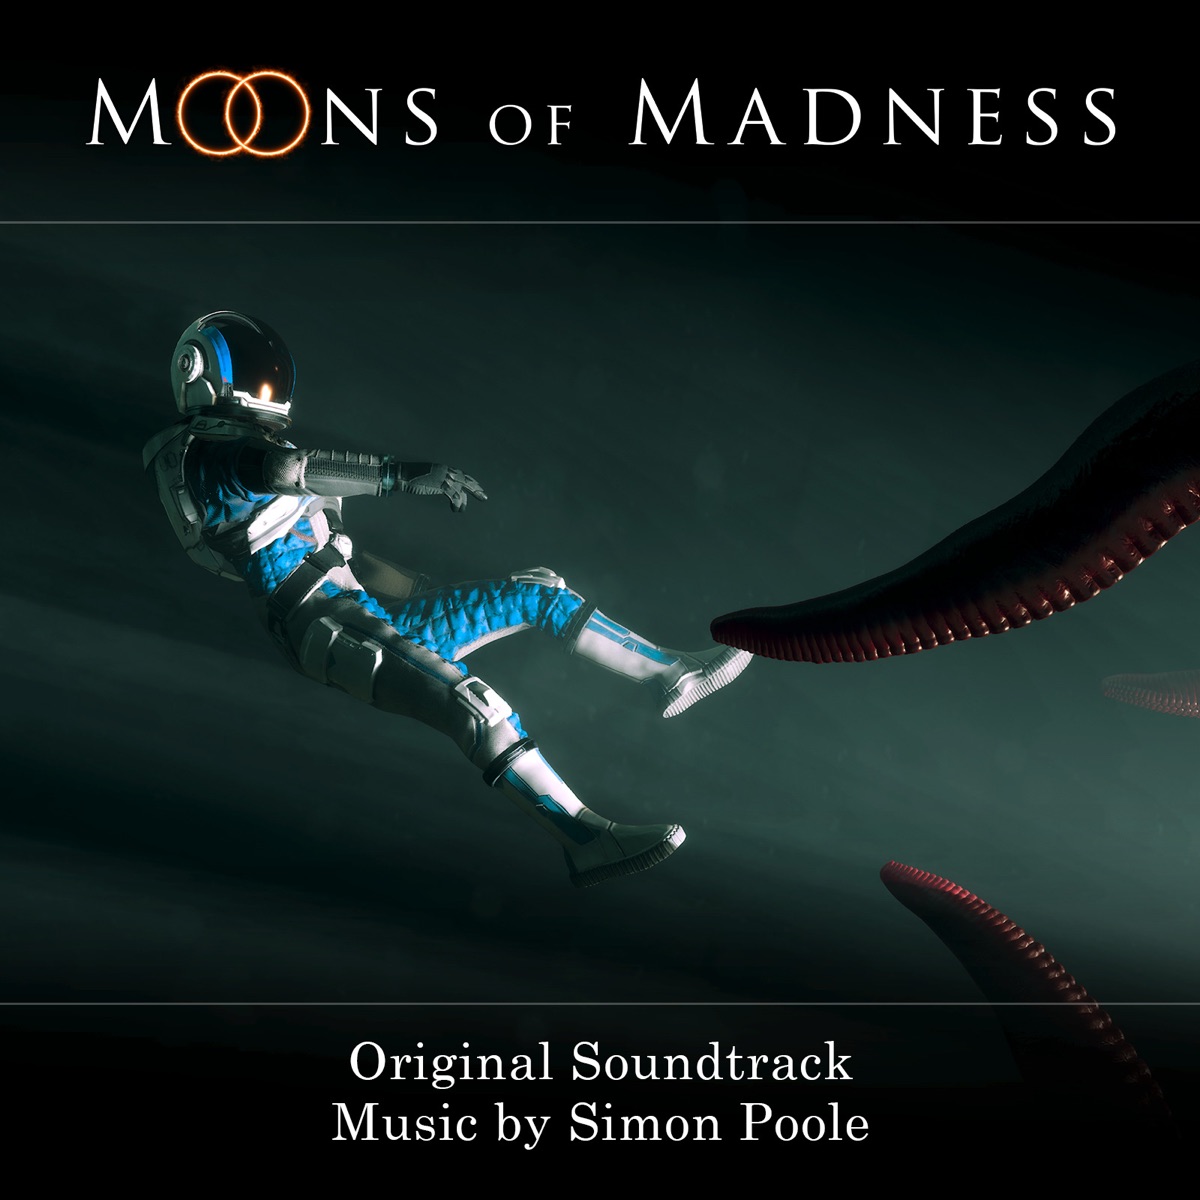 moons of madness steam download free